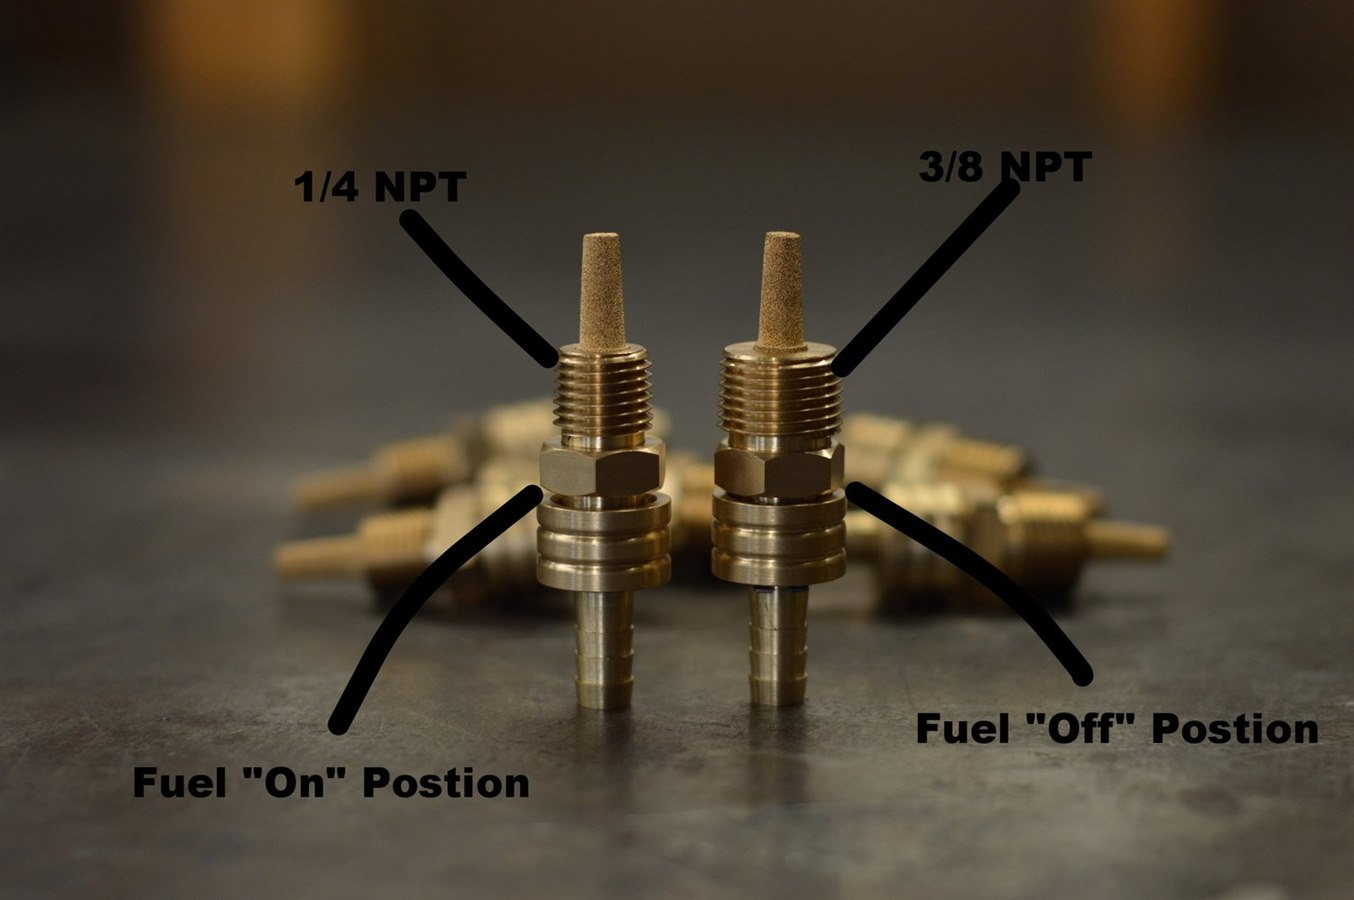 A set of polished brass fuel injectors with 3/8" NPT Male Brass Fuel Petcock by Prism Supply Co fittings on a table.